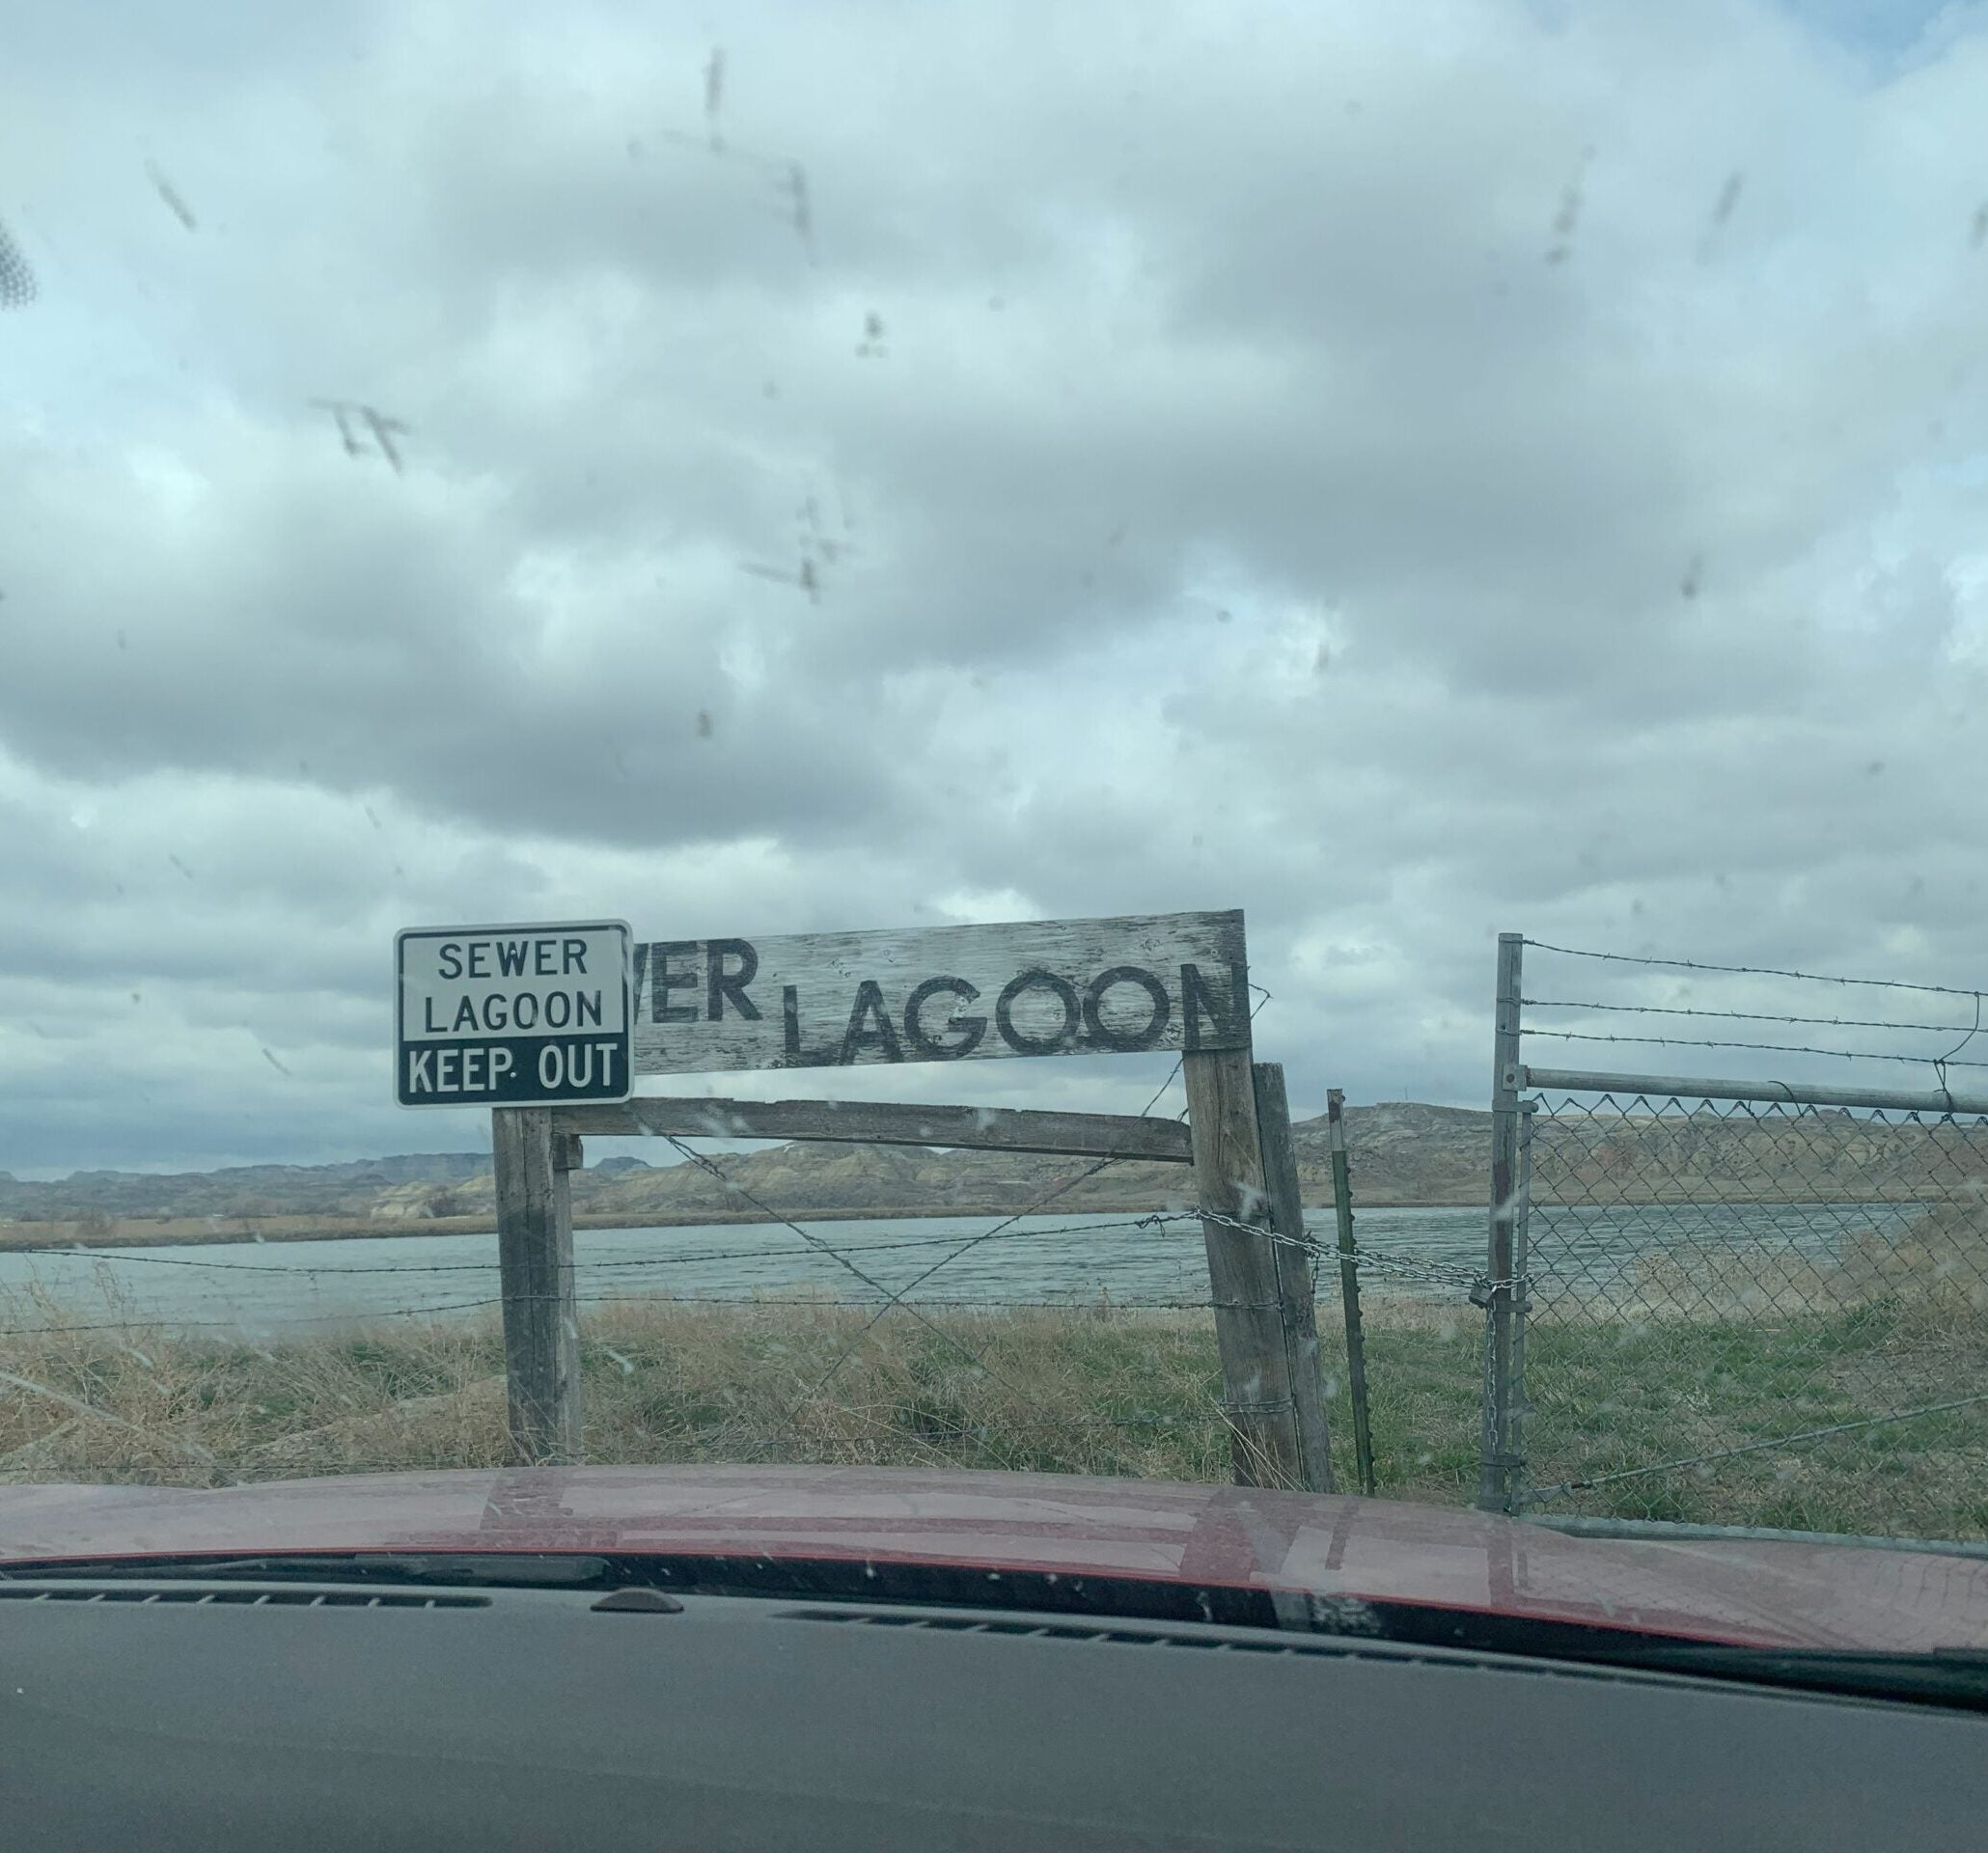 A photo taken through the windshield of a vehicle. There is a locked gate in front of some water that is a sewer lagoon. There are 2 signs stating that it is a sewer lagoon and one says KEEP OUT. The cloudy skies look ominous.